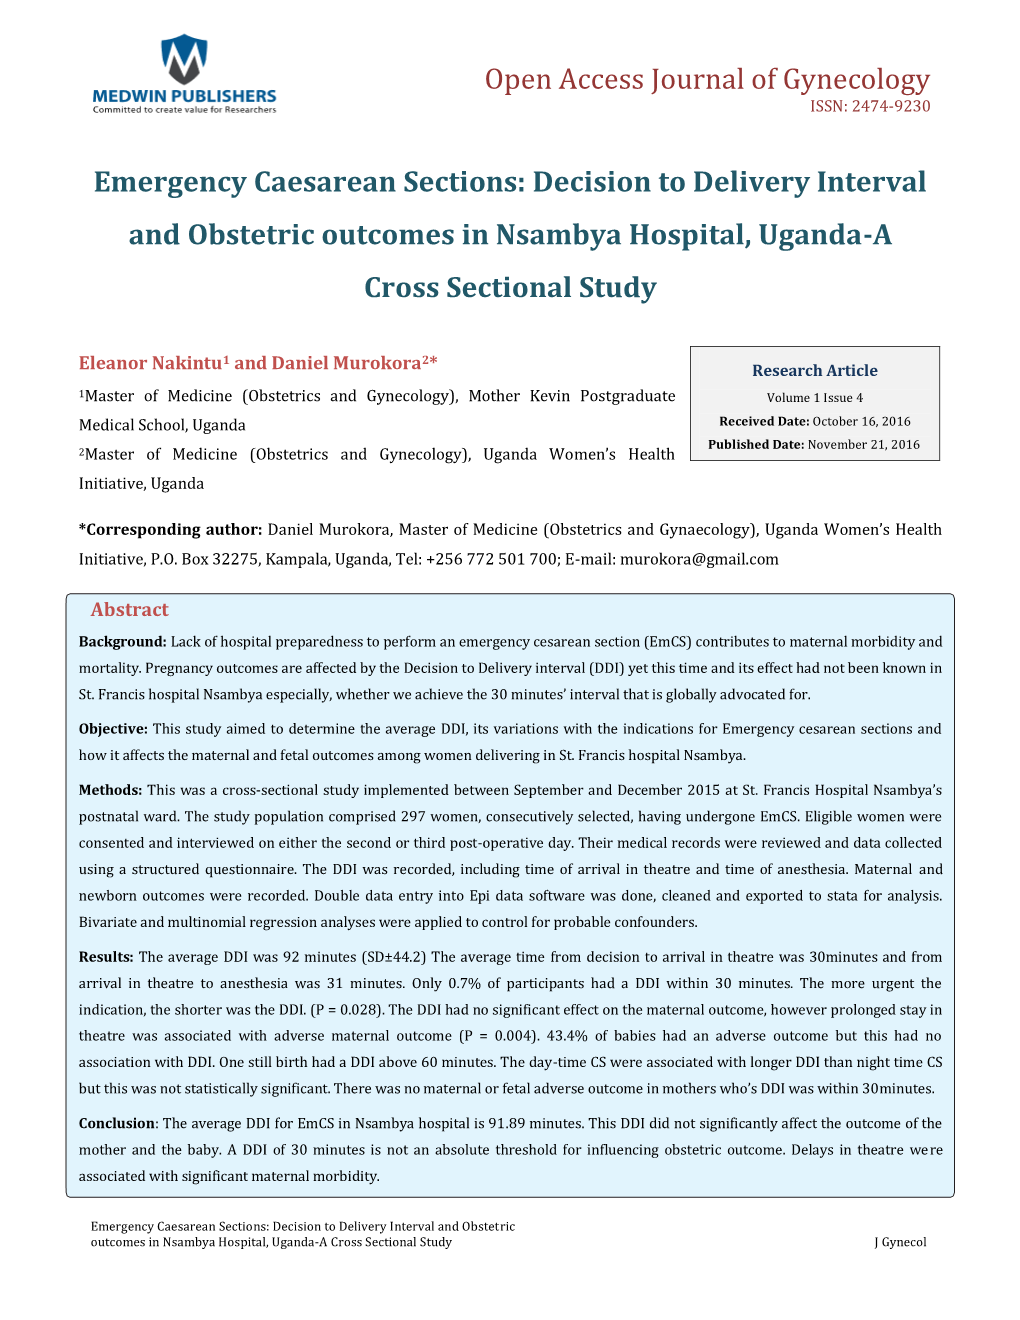 Emergency Caesarean Sections: Decision to Delivery Interval and Obstetric Outcomes in Nsambya Hospital, Uganda-A Cross Sectional Study